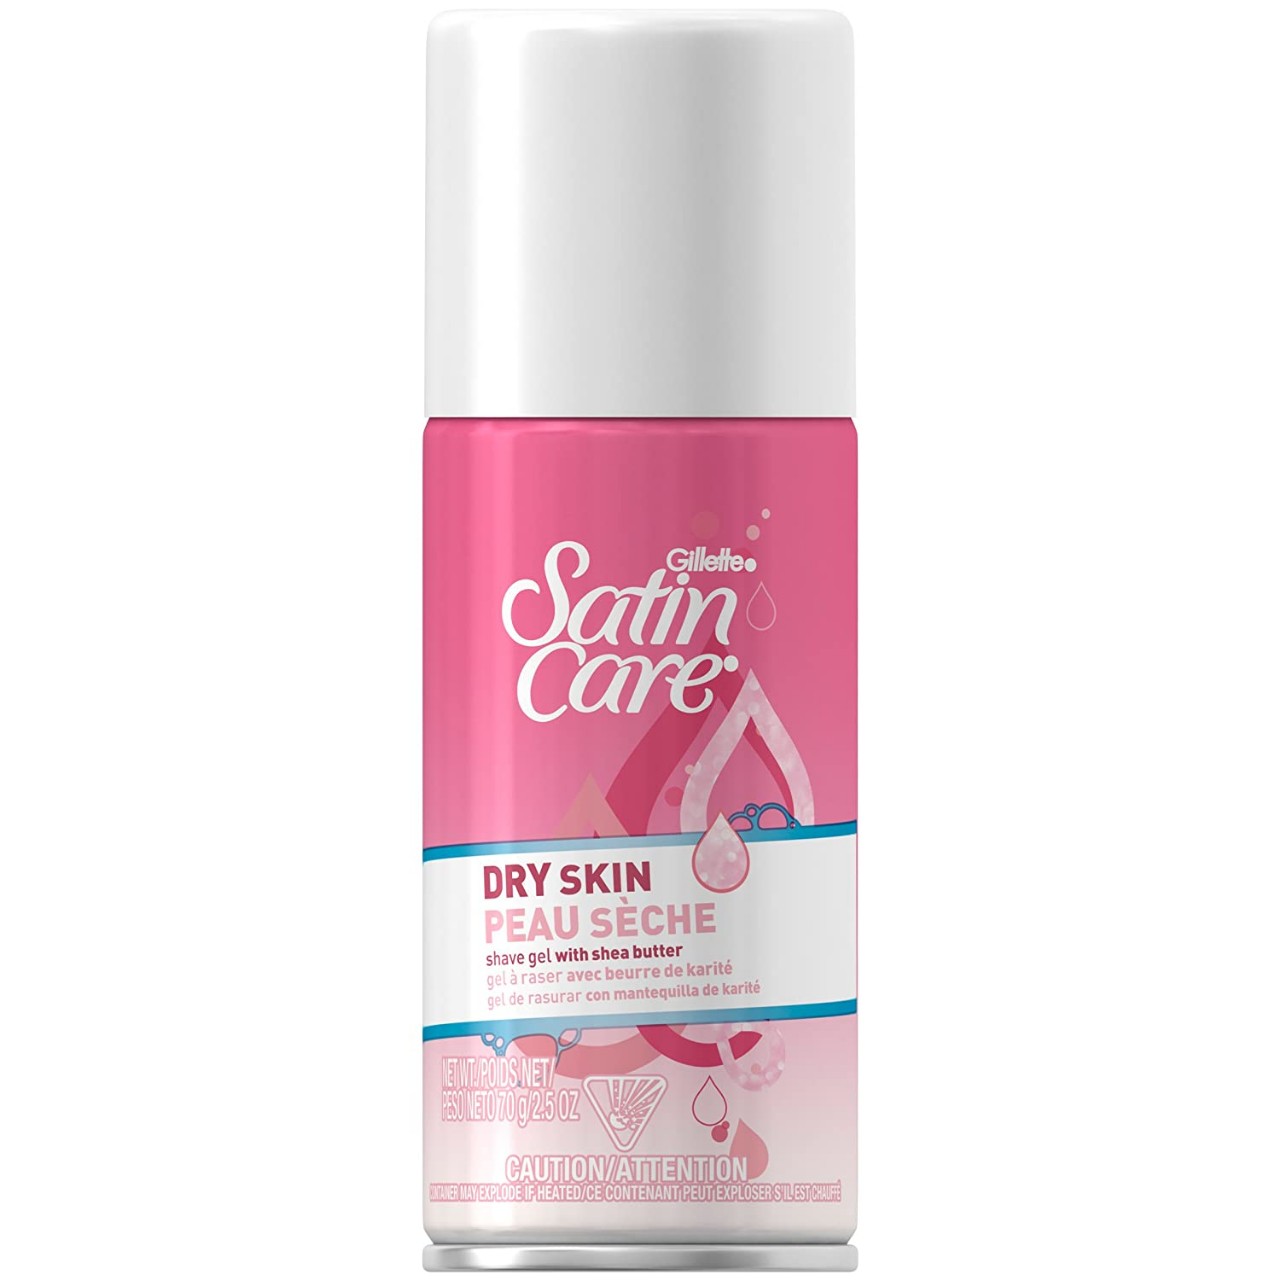 Satin care shave Gel with Shea Butter 2.5 oz